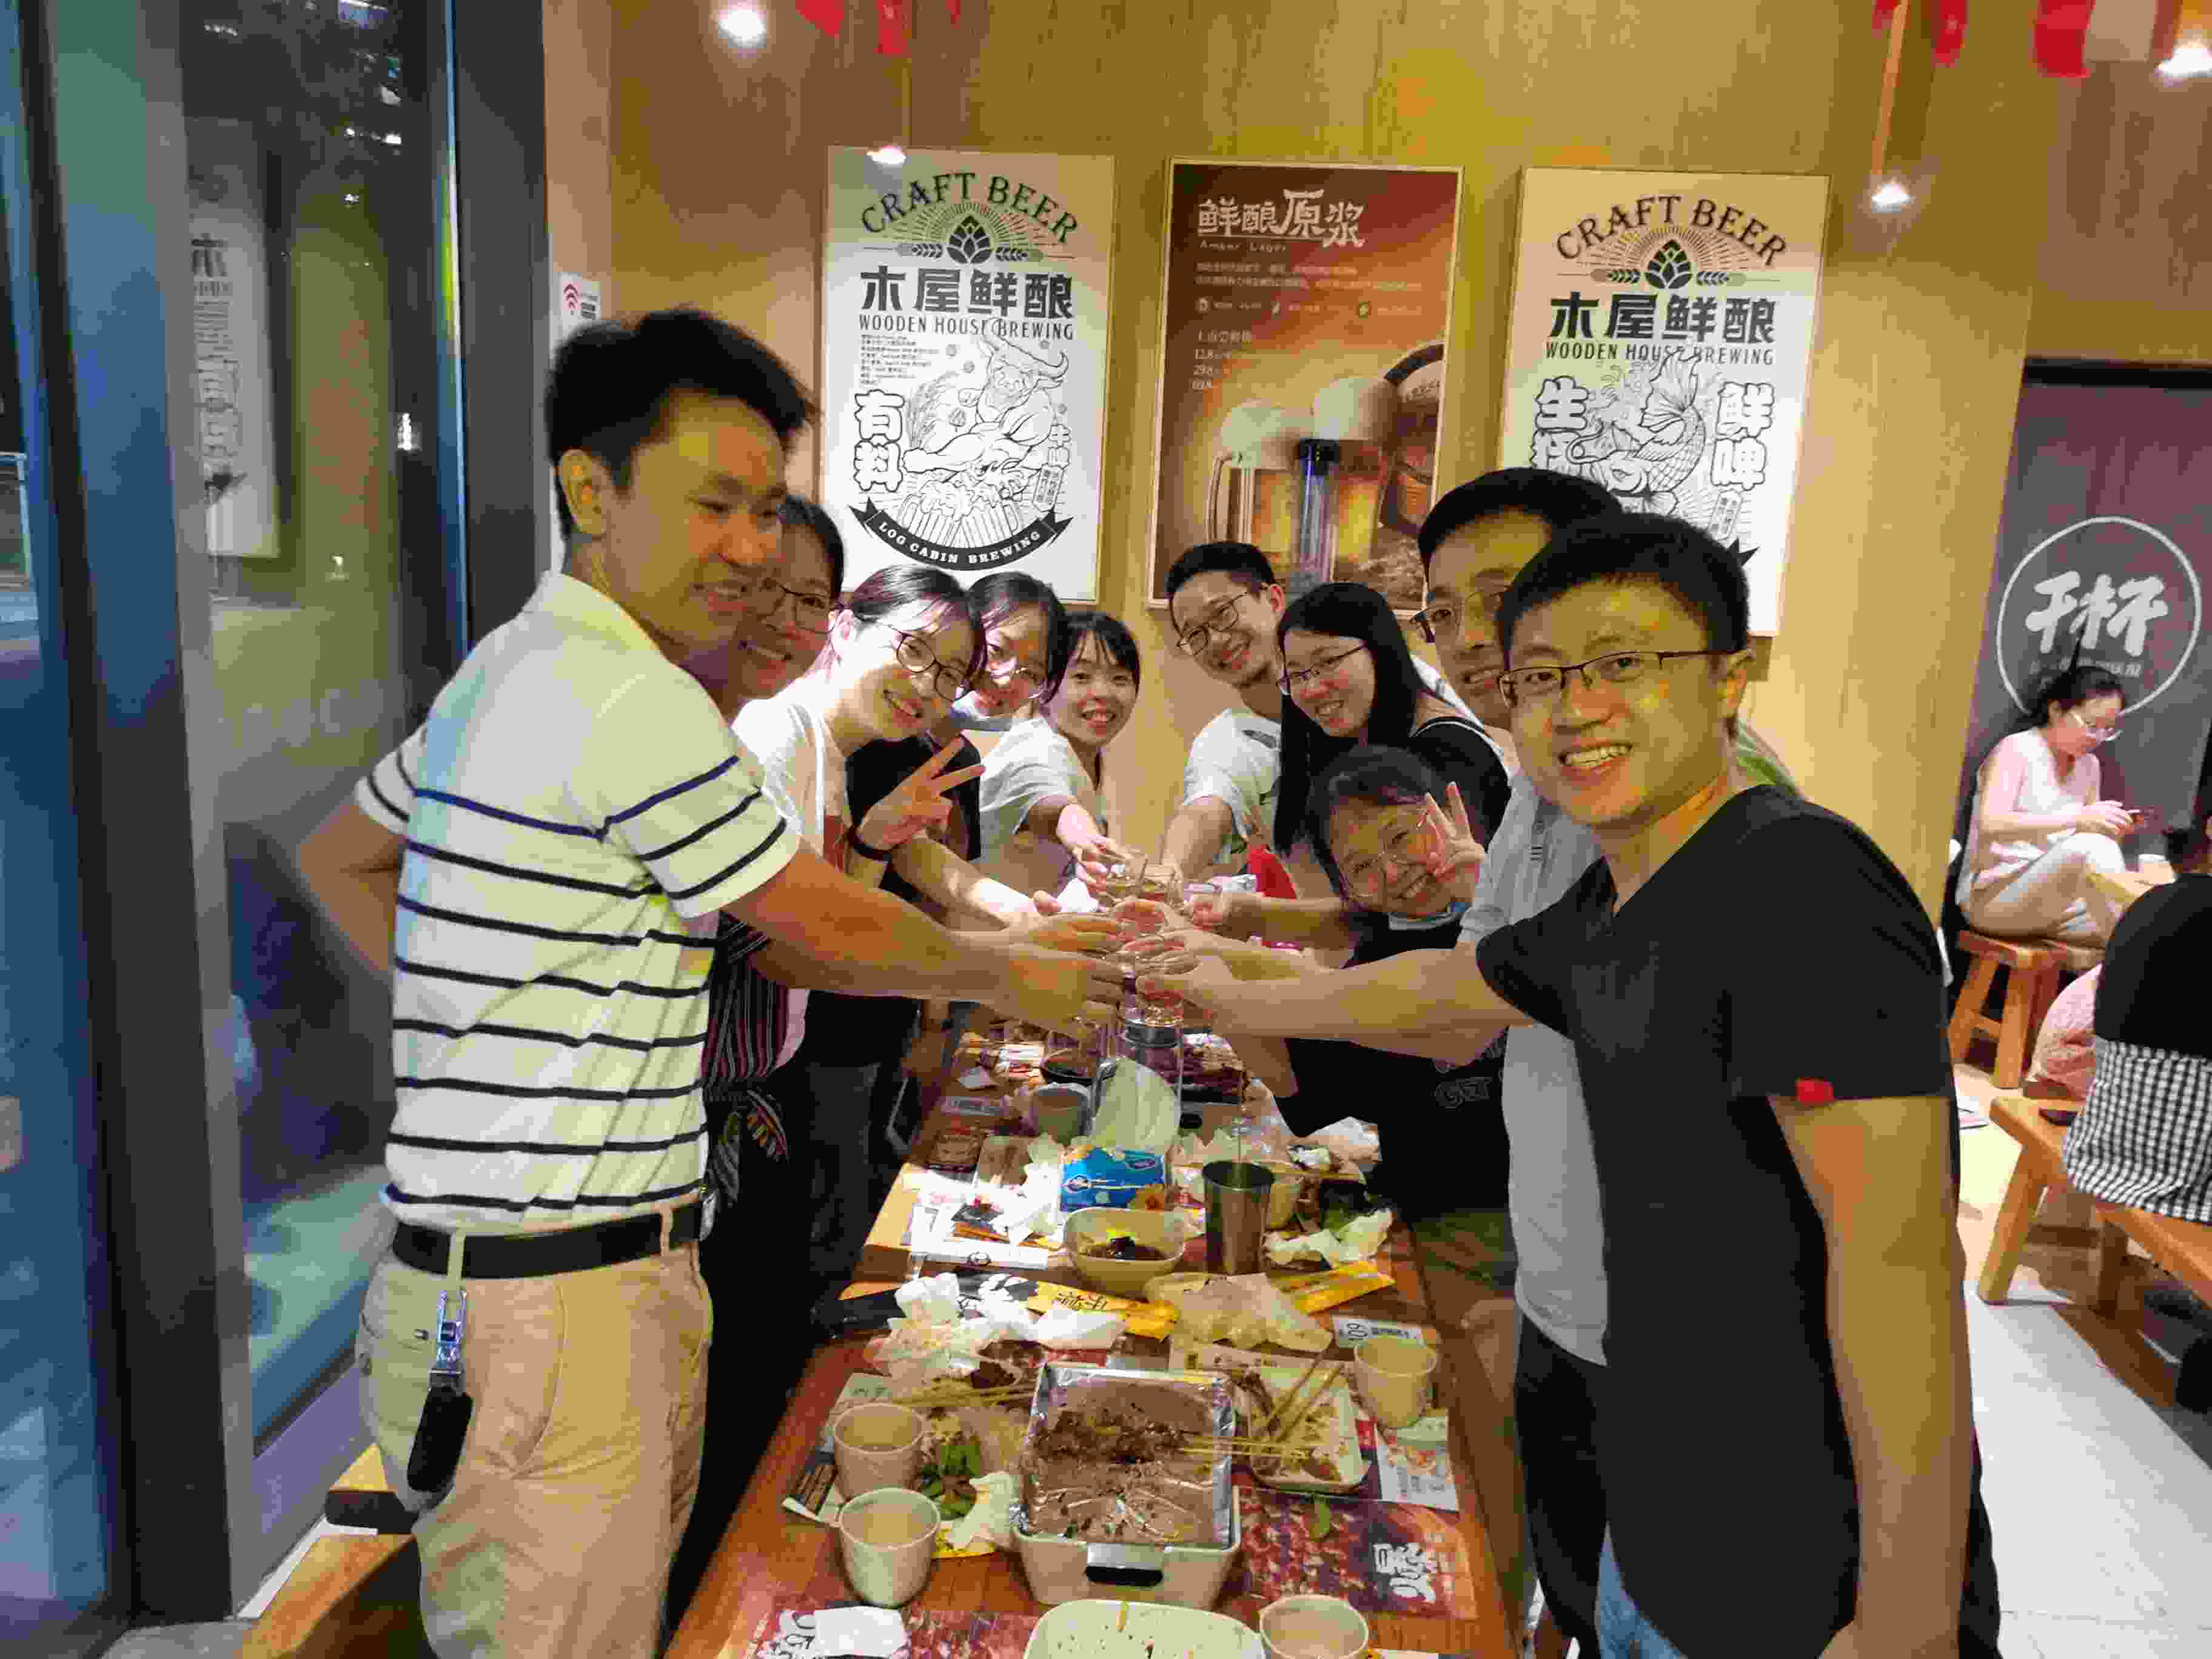 Zhong lab members stand around a table of food, smiling and raising their drinks together over the table's center